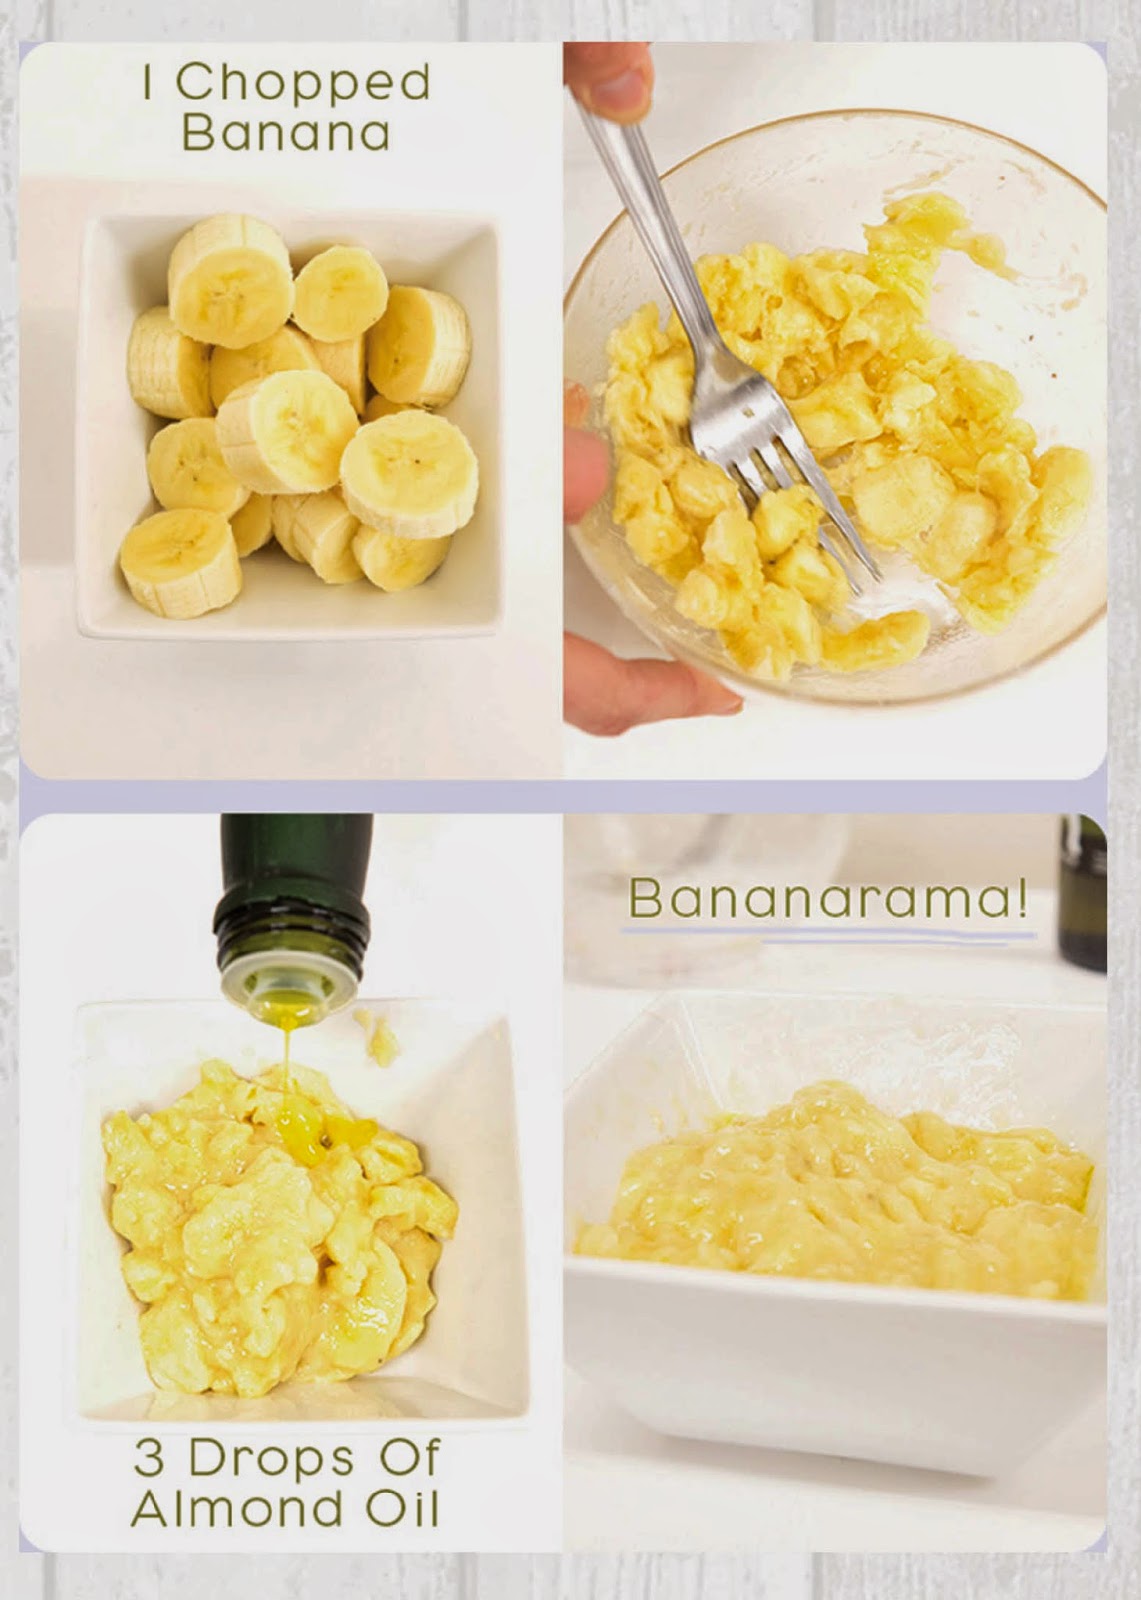 BEAUTY | How To Make A Banana And Almond Oil Face Mask